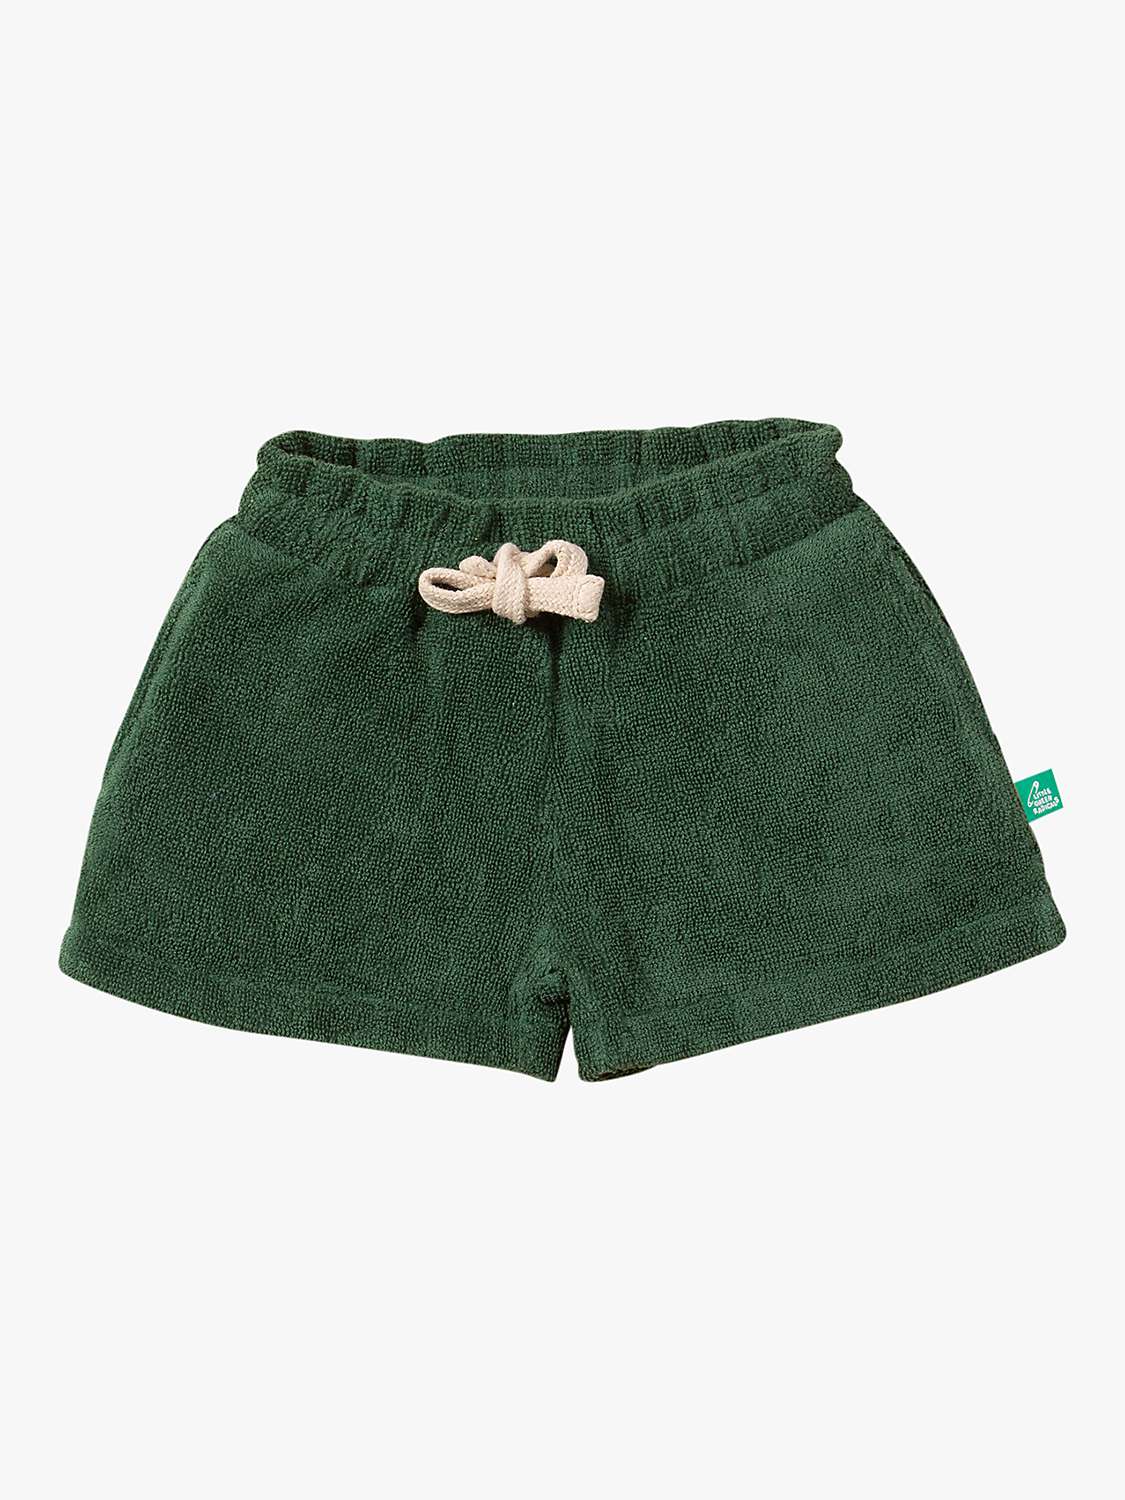 Buy Little Green Radicals Baby Organic Cotton Towelling Shorts, Olive Solid Online at johnlewis.com